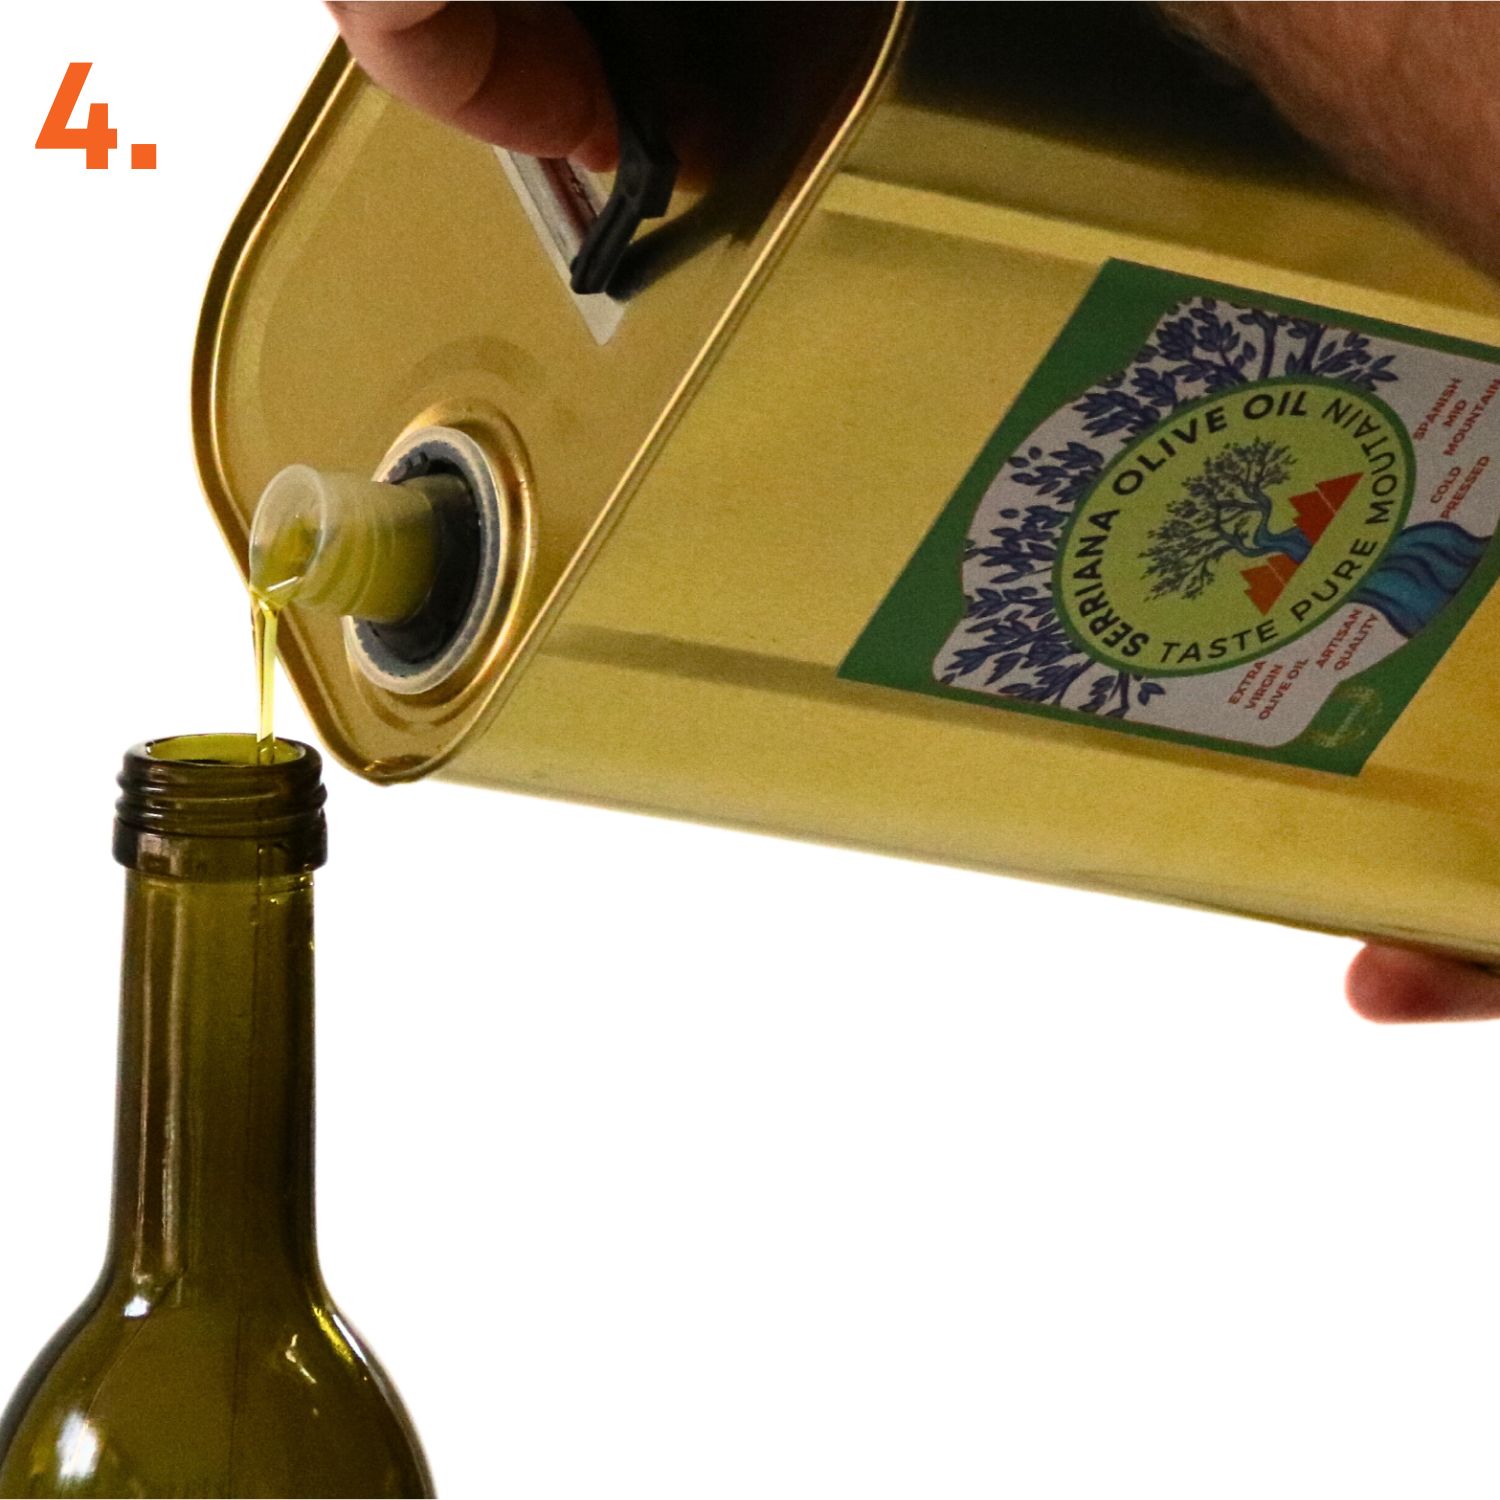 Serriana olive oil 3 litre refill can - pouring olive oil